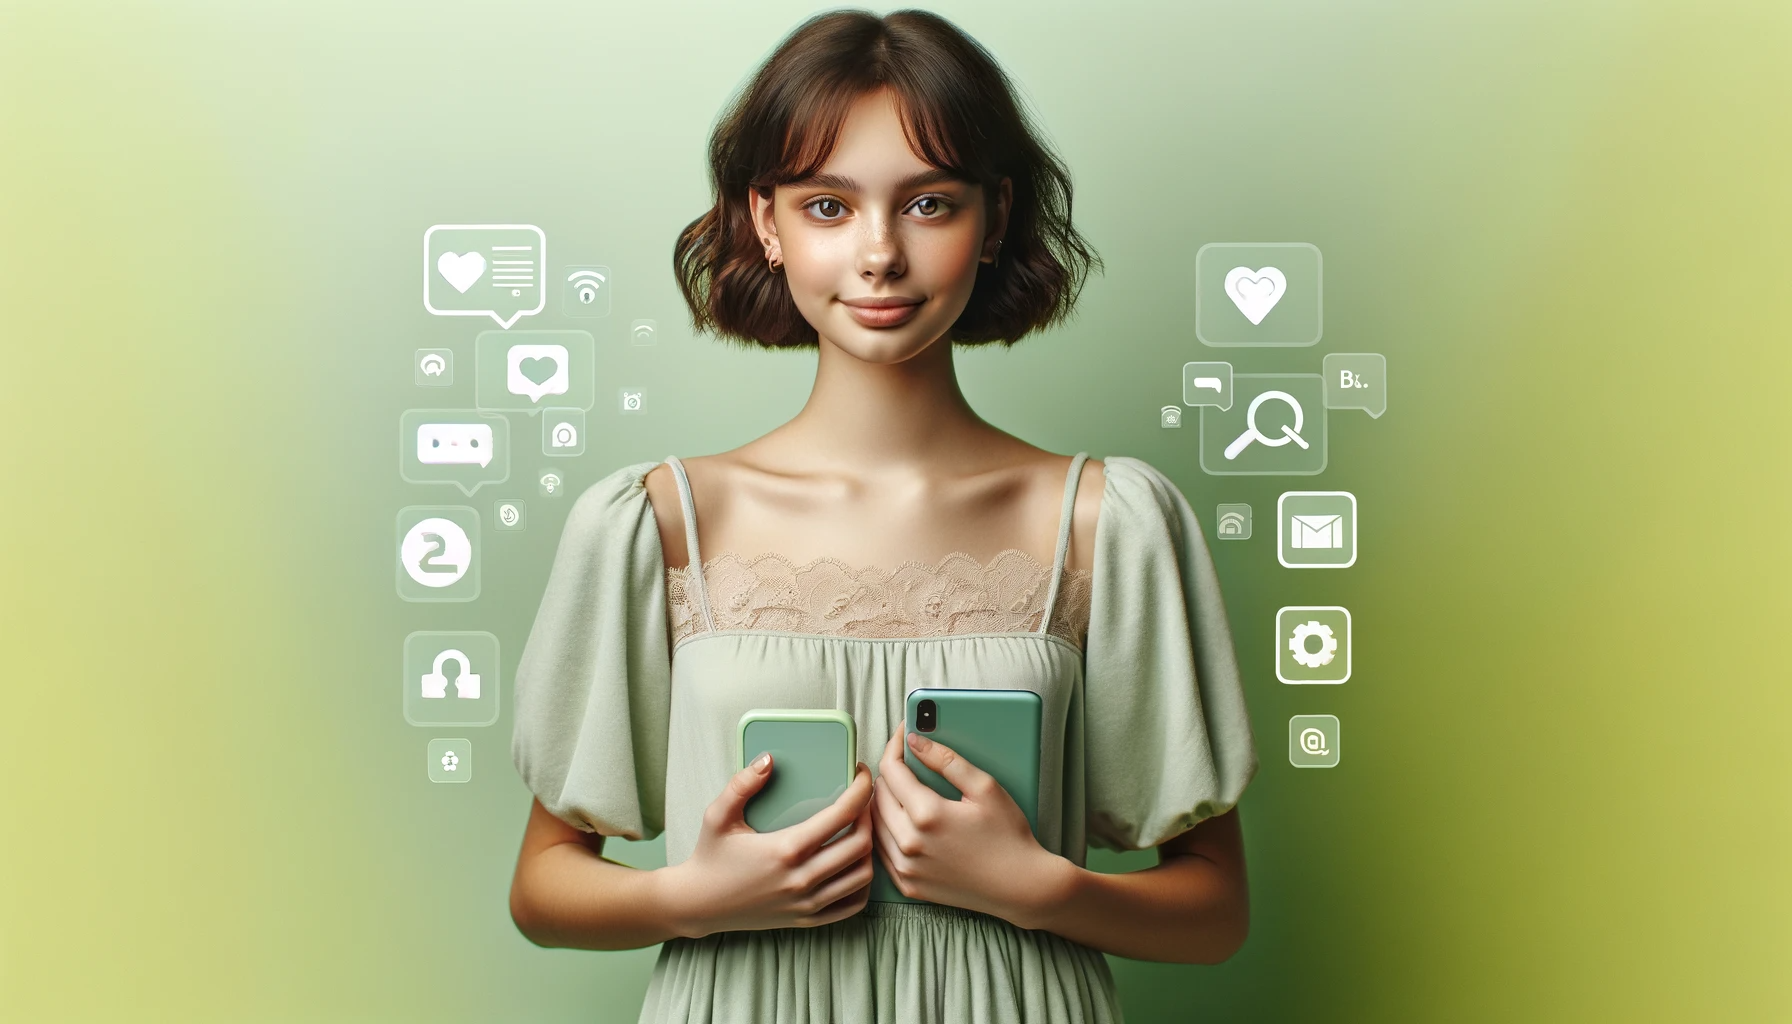 Turkish girl with short brown hair, wearing a light green dress, holding modern smart devices in her hands